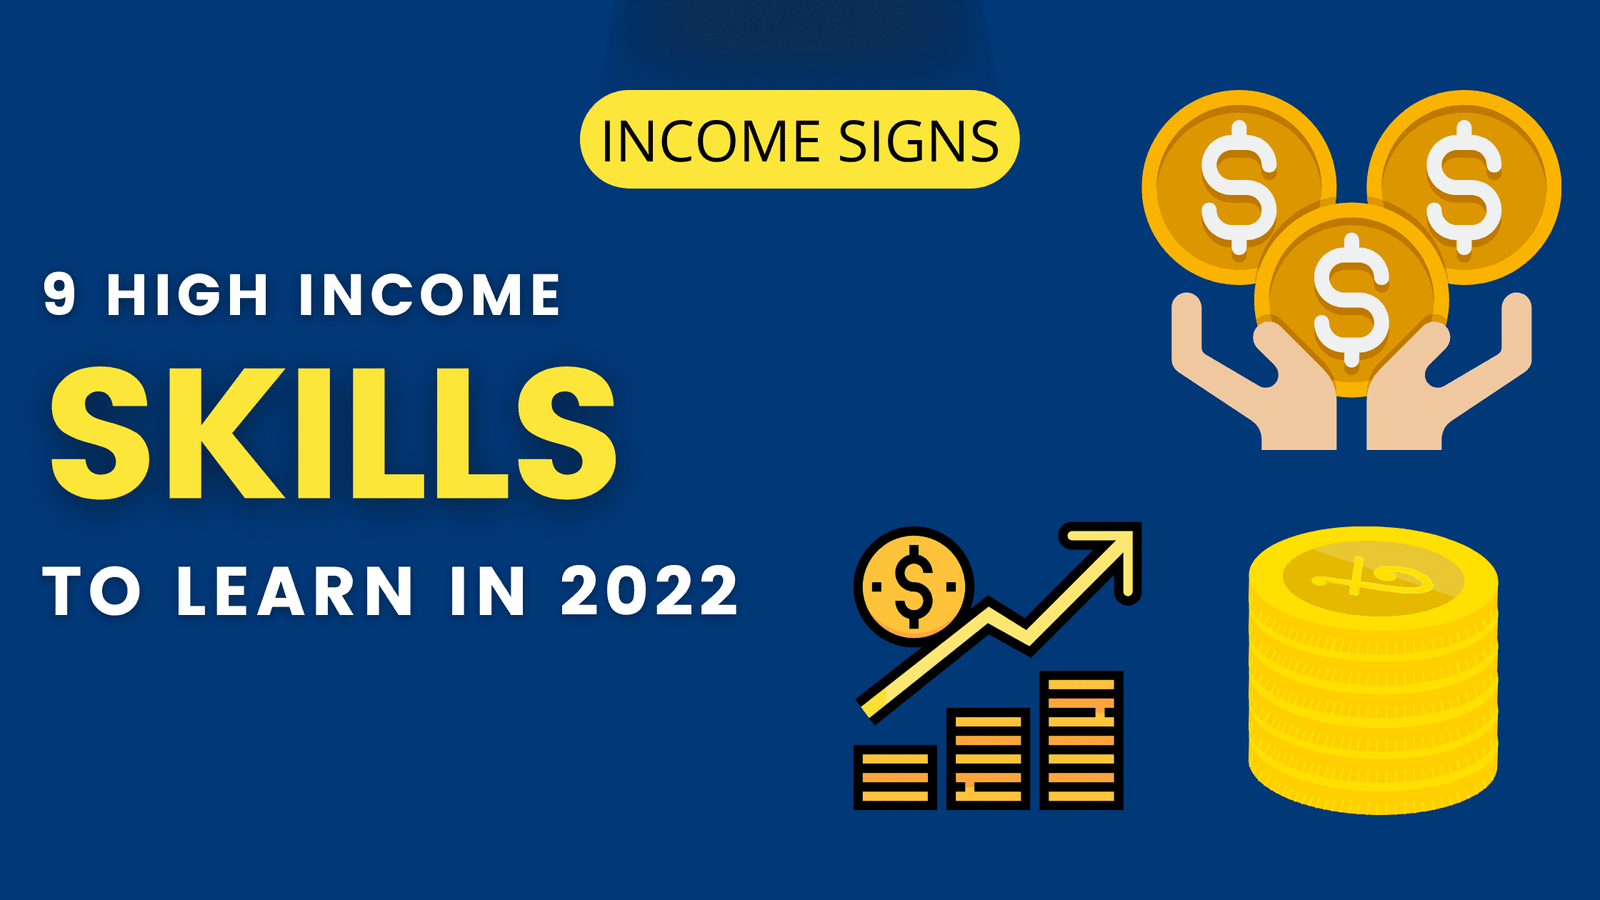 11 Best High Income Skills to Learn in 2022 Income Signs